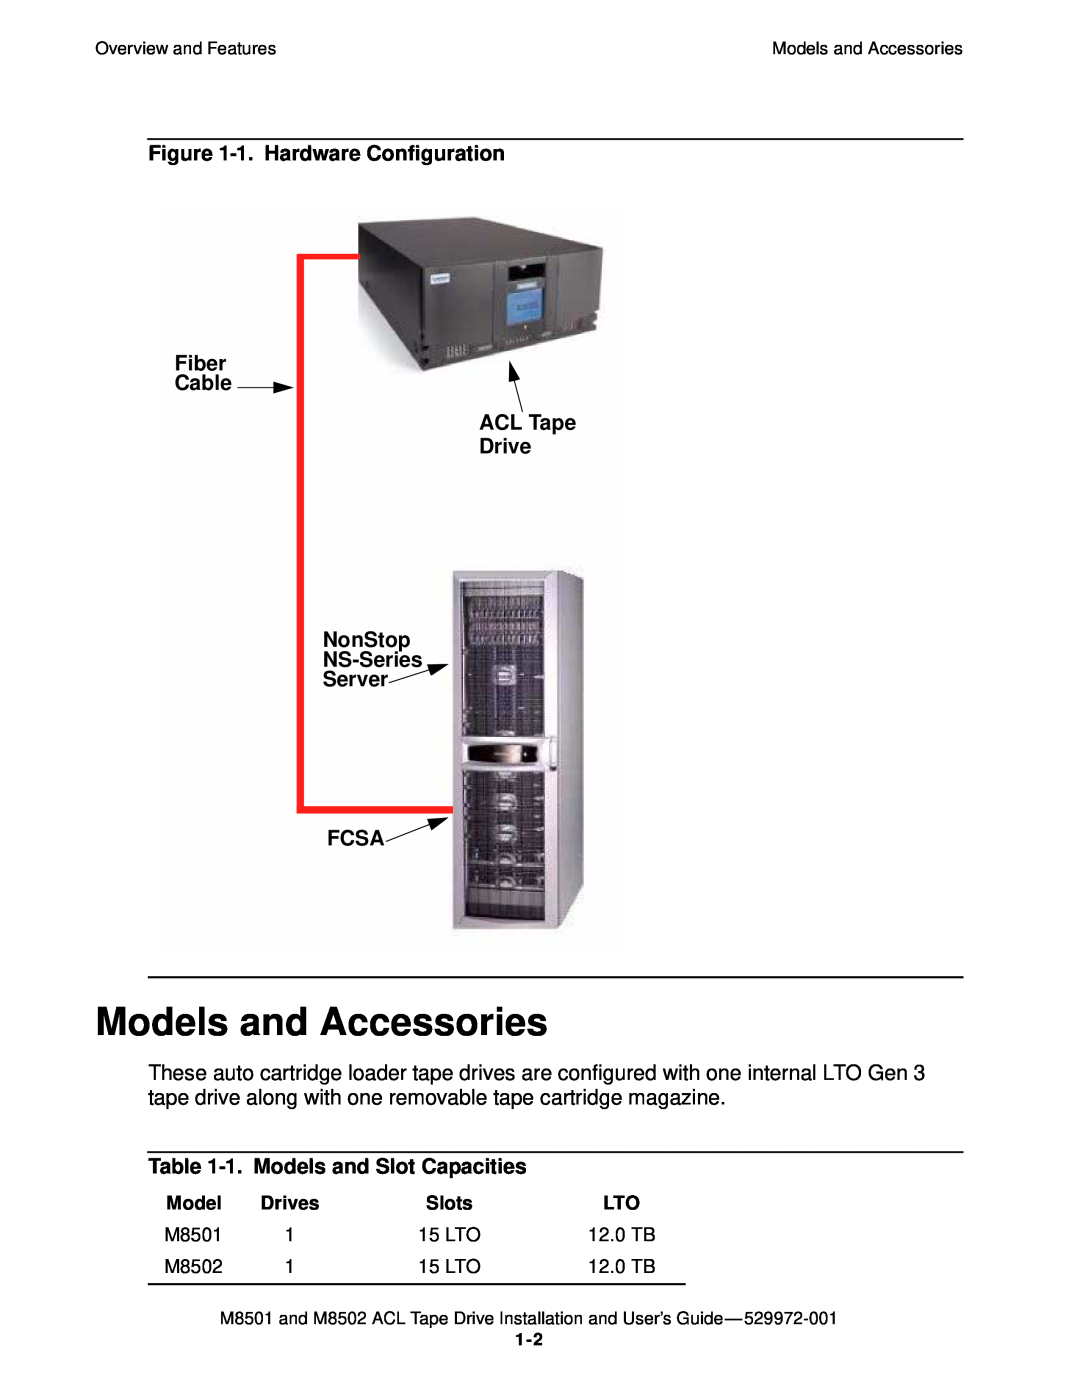 SMC Networks M8501 manual Models and Accessories, 1. Hardware Configuration Fiber Cable ACL Tape Drive NonStop, Drives 